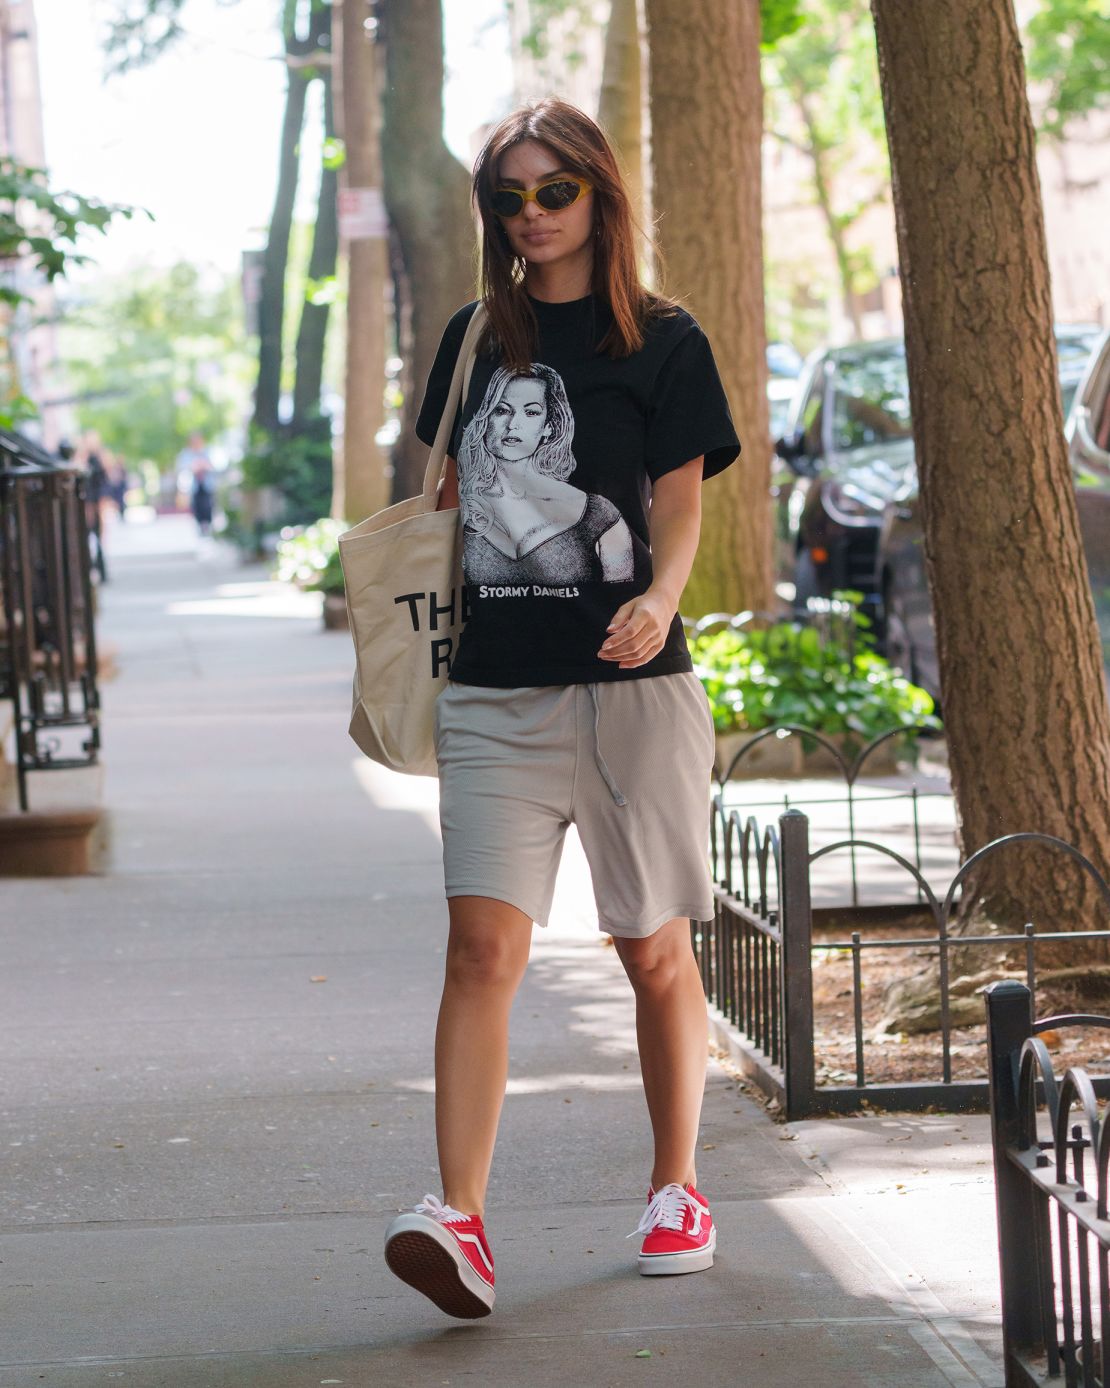 Ratajkowski wore her $95 Stormy Daniels T-shirt out in New York.